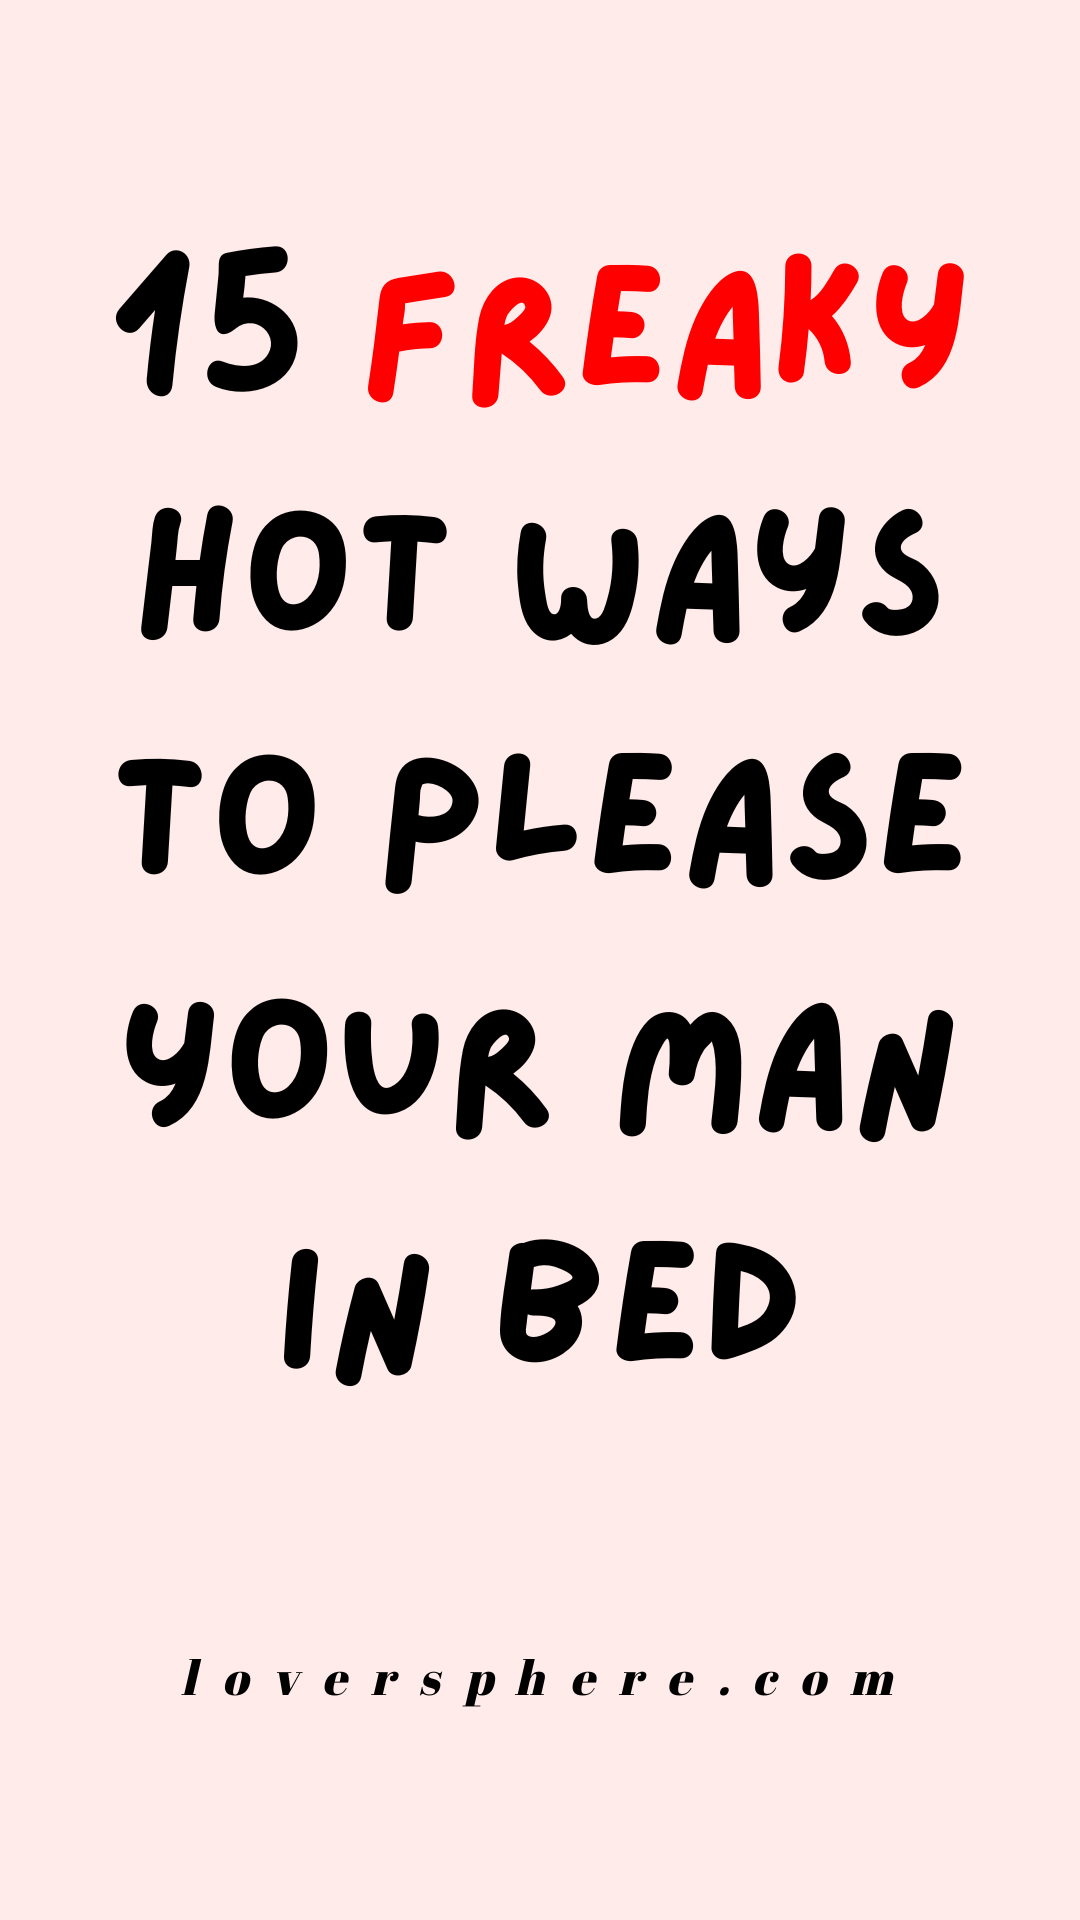 ways to please your man in bed